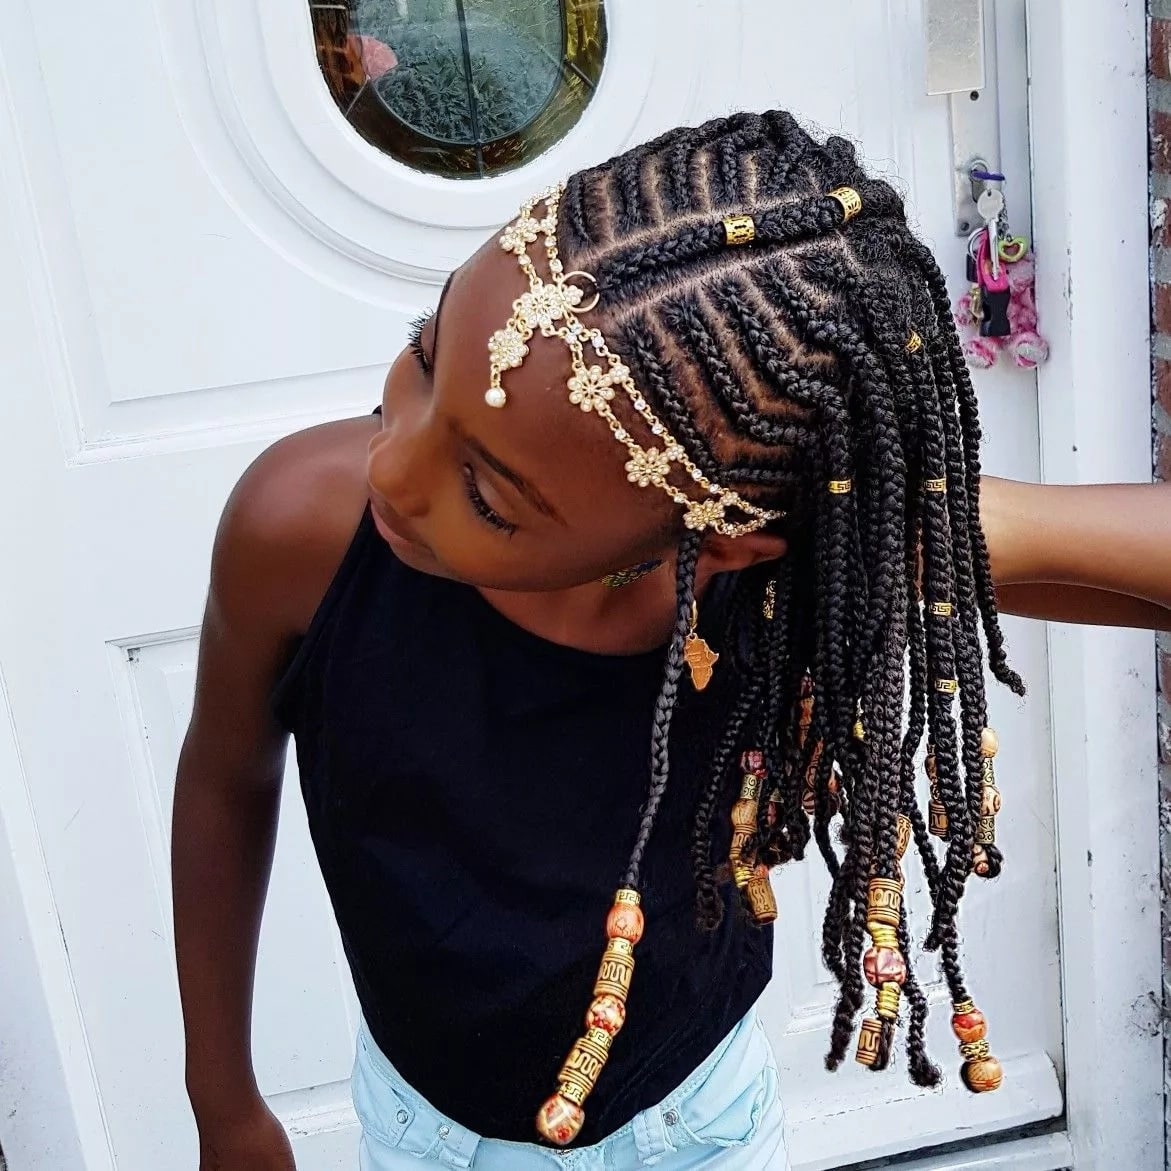 african braids hairstyles pictures
braided hairstyles
braids for natural hair